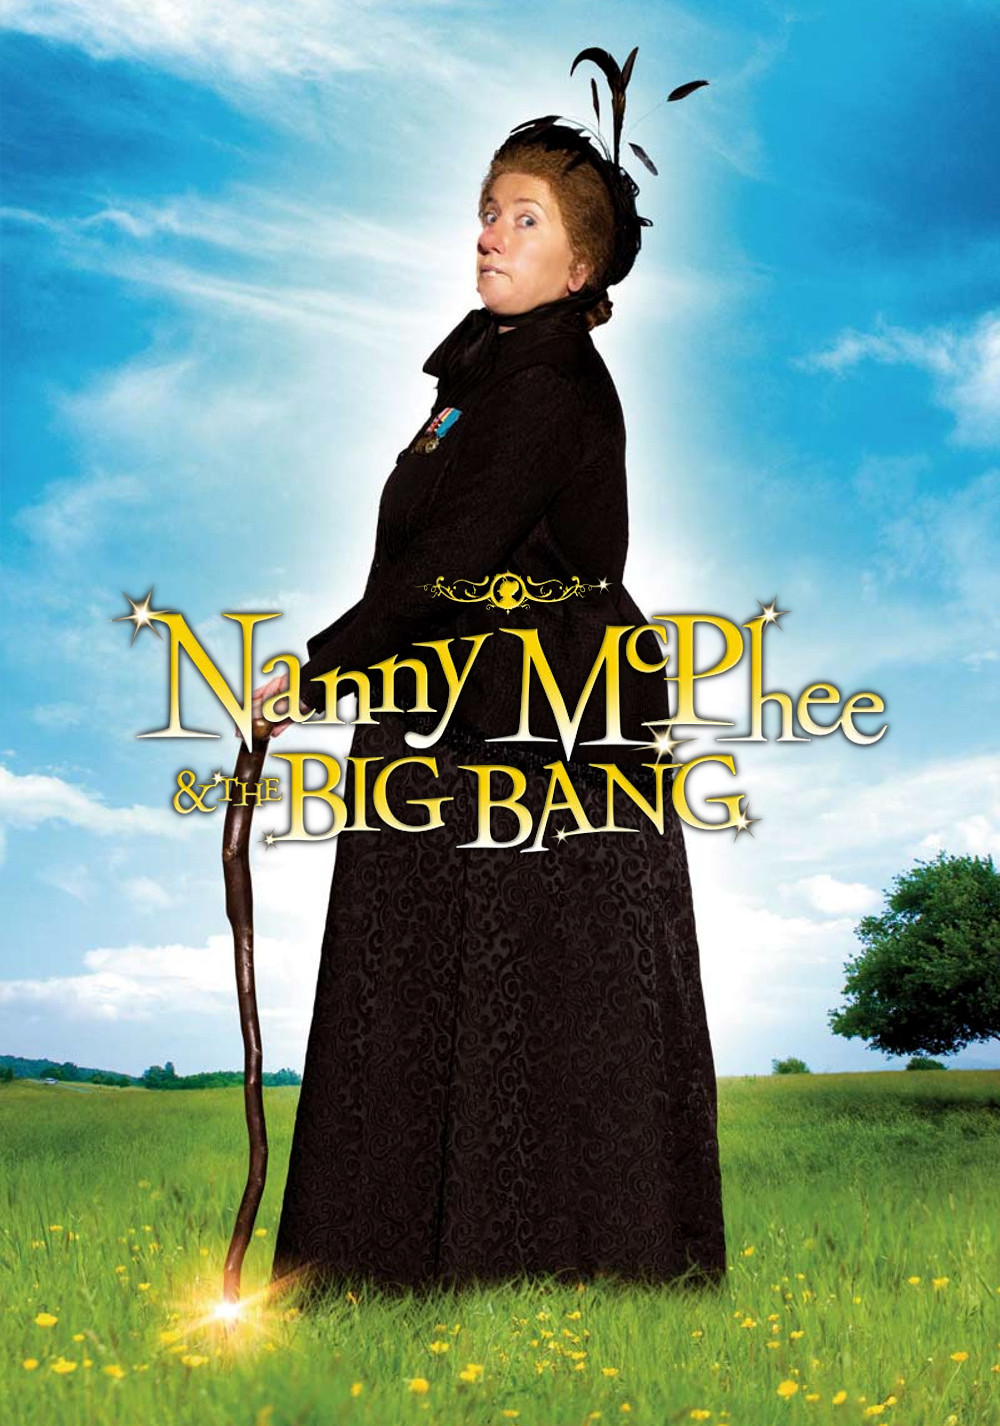 Nanny McPhee Returns Movie Poster - ID: 112080 - Image Abyss.